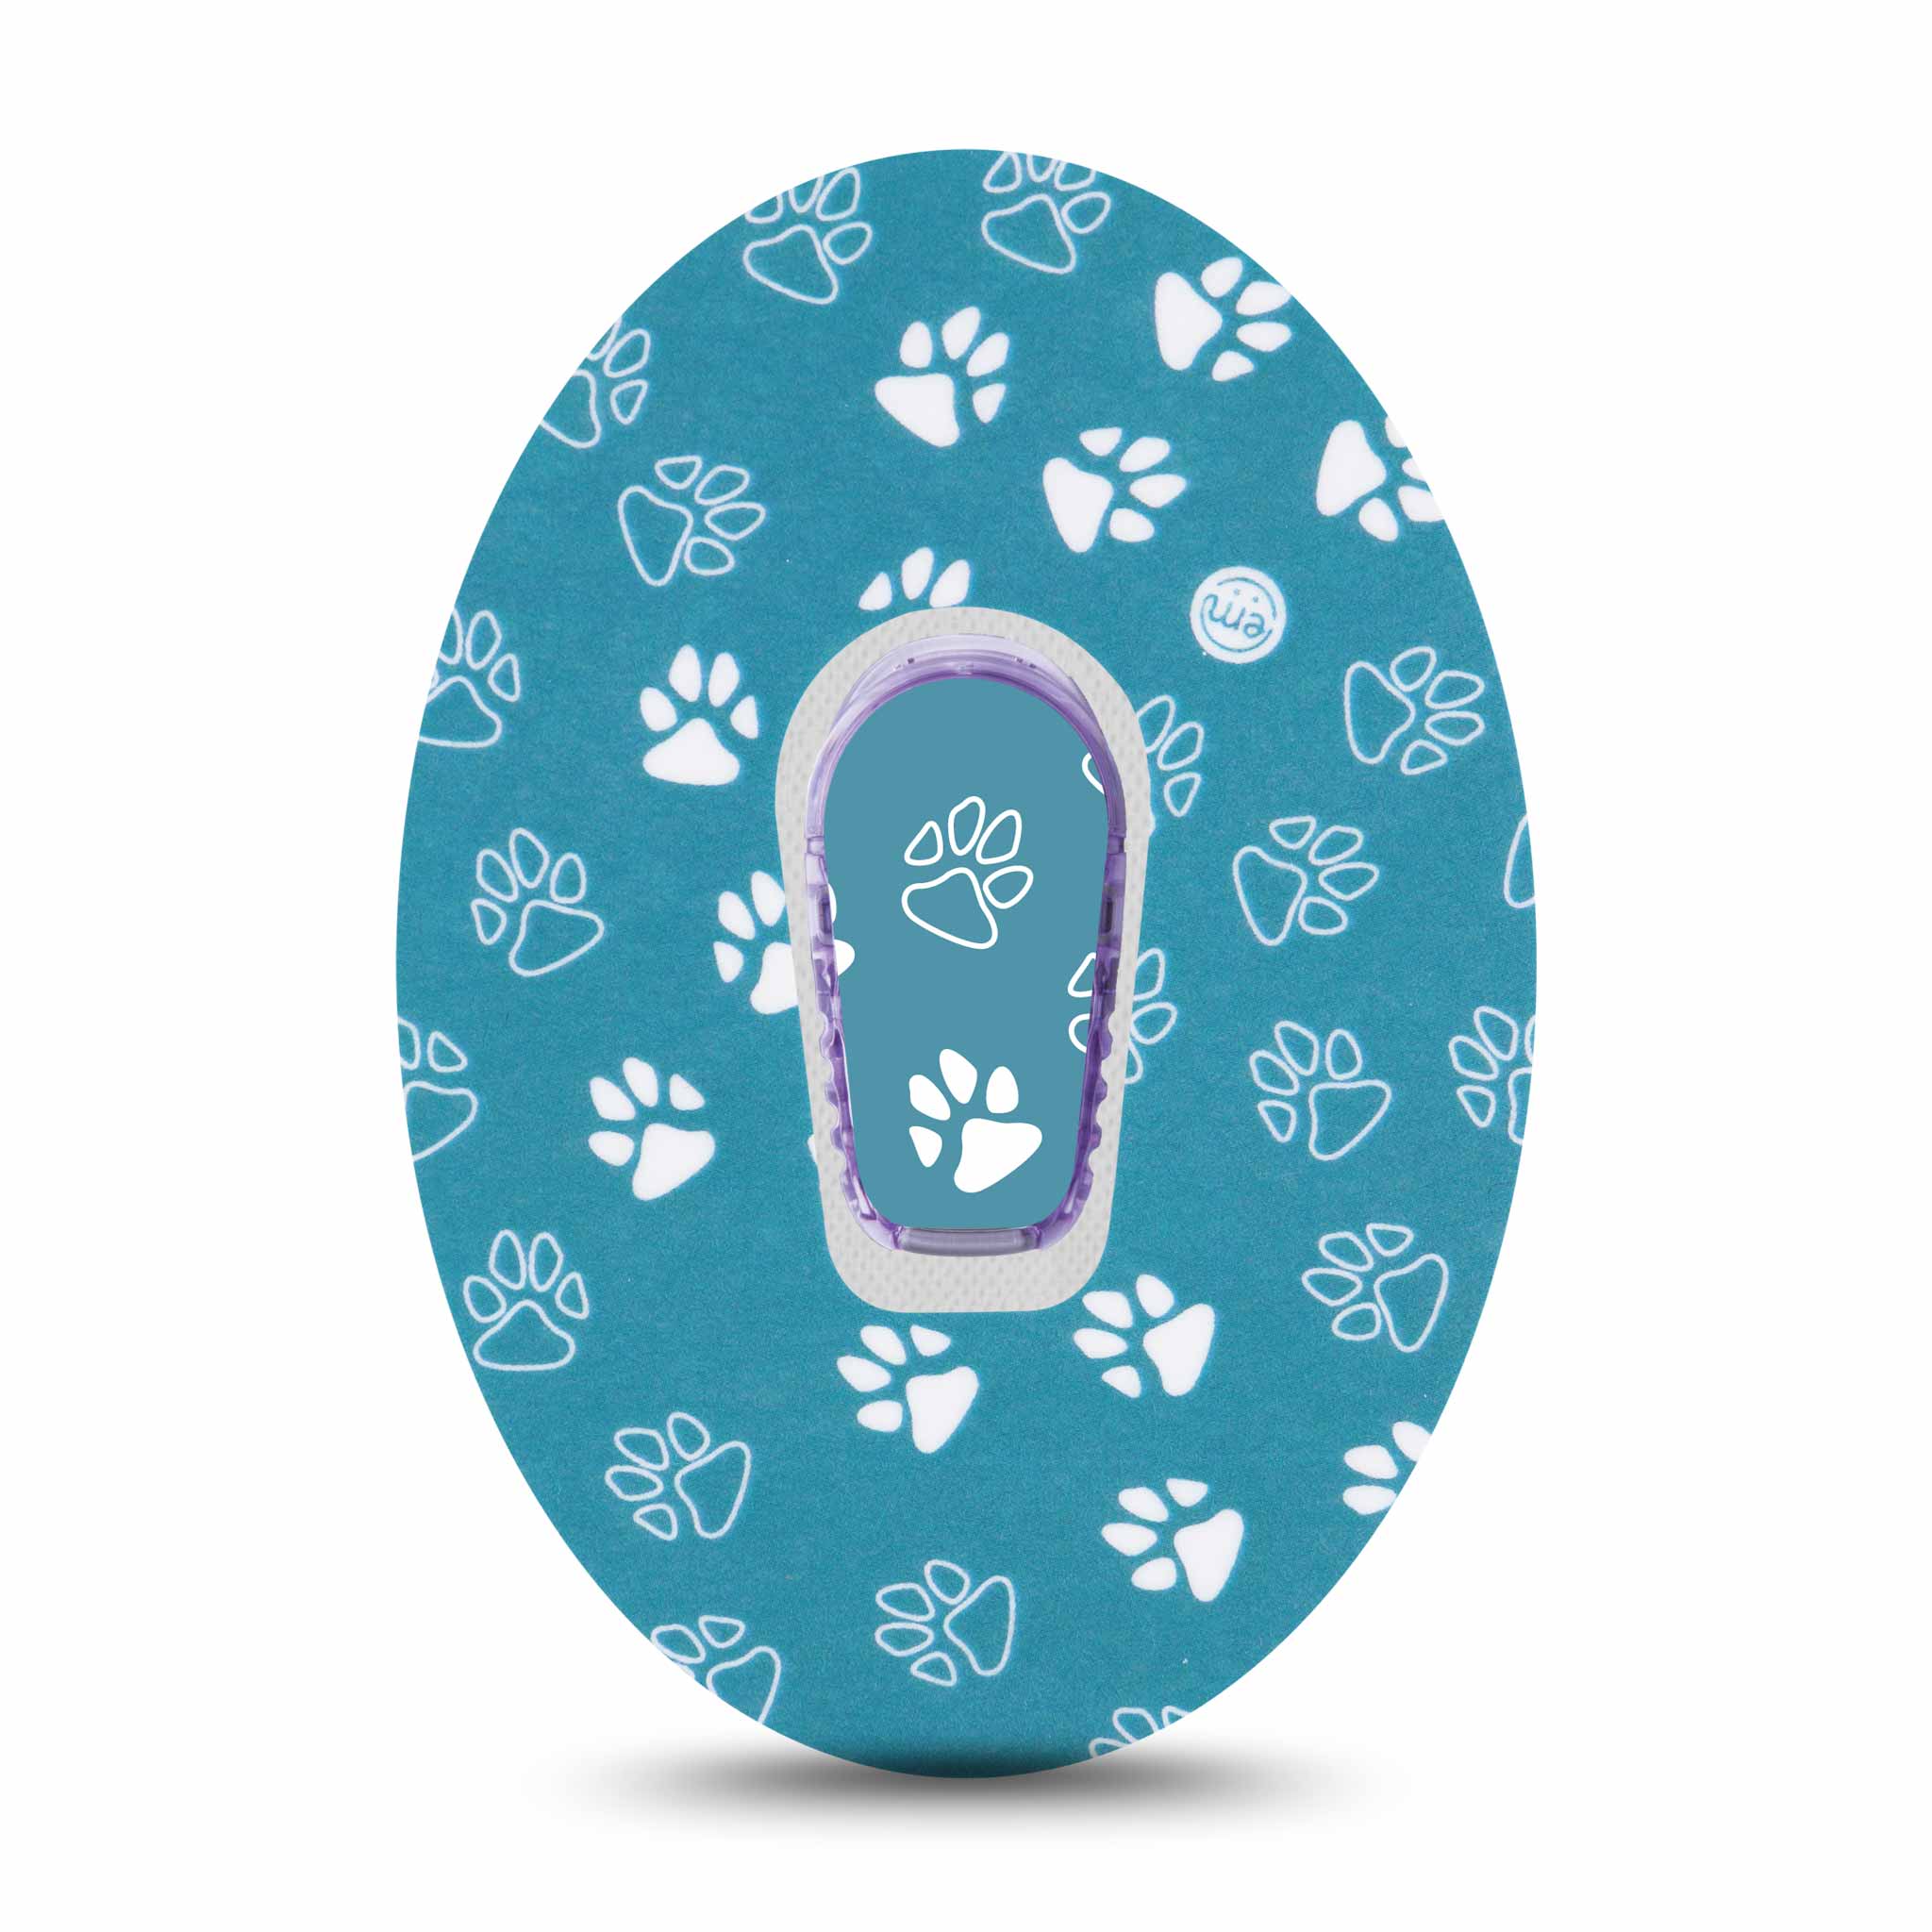 ExpressionMed G6/One Transmitter Sticker (Pawprint